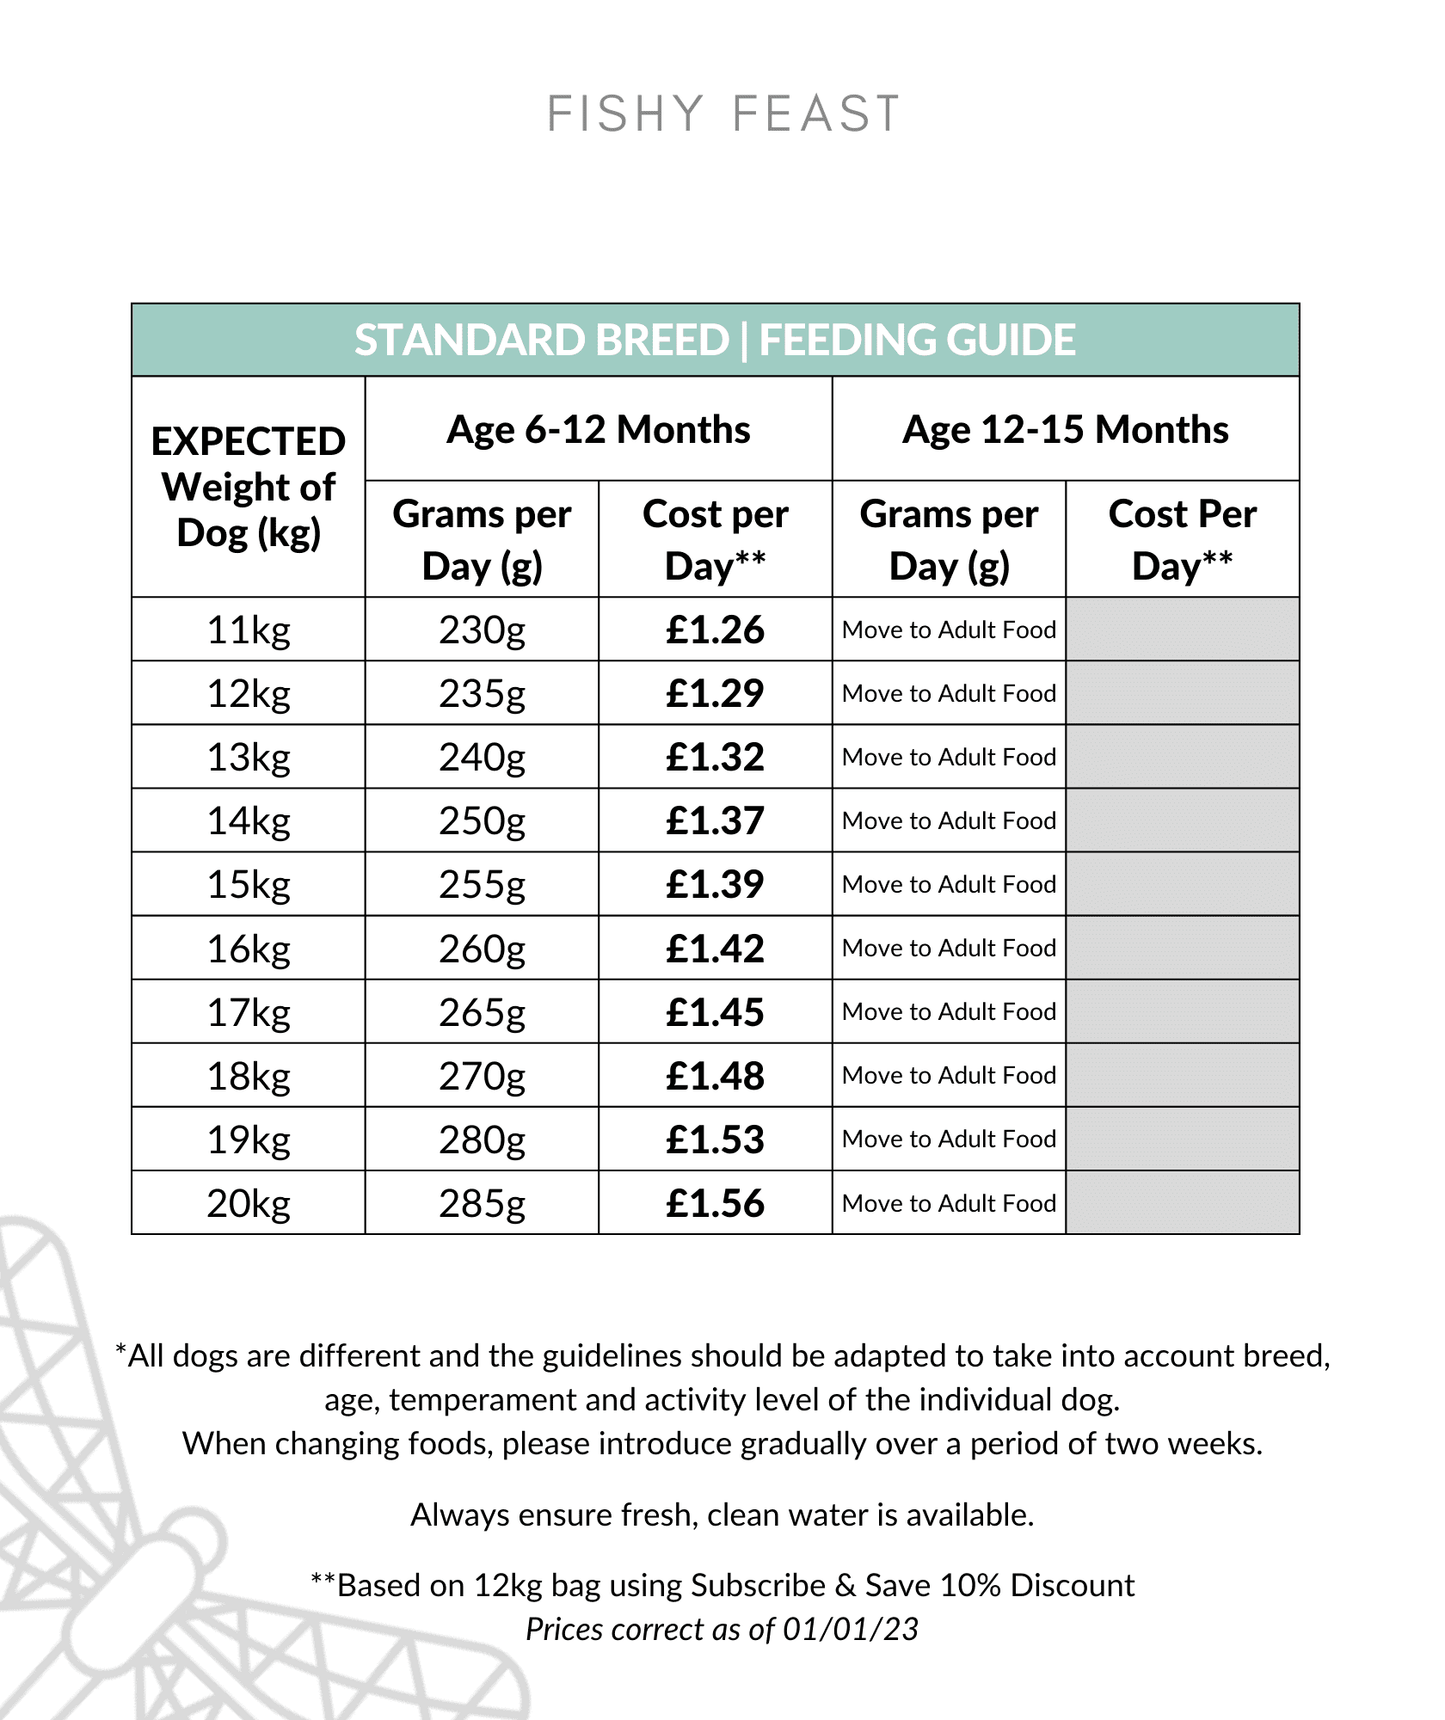 Fishy Feast feeding guide 11-20kg up to 15 months